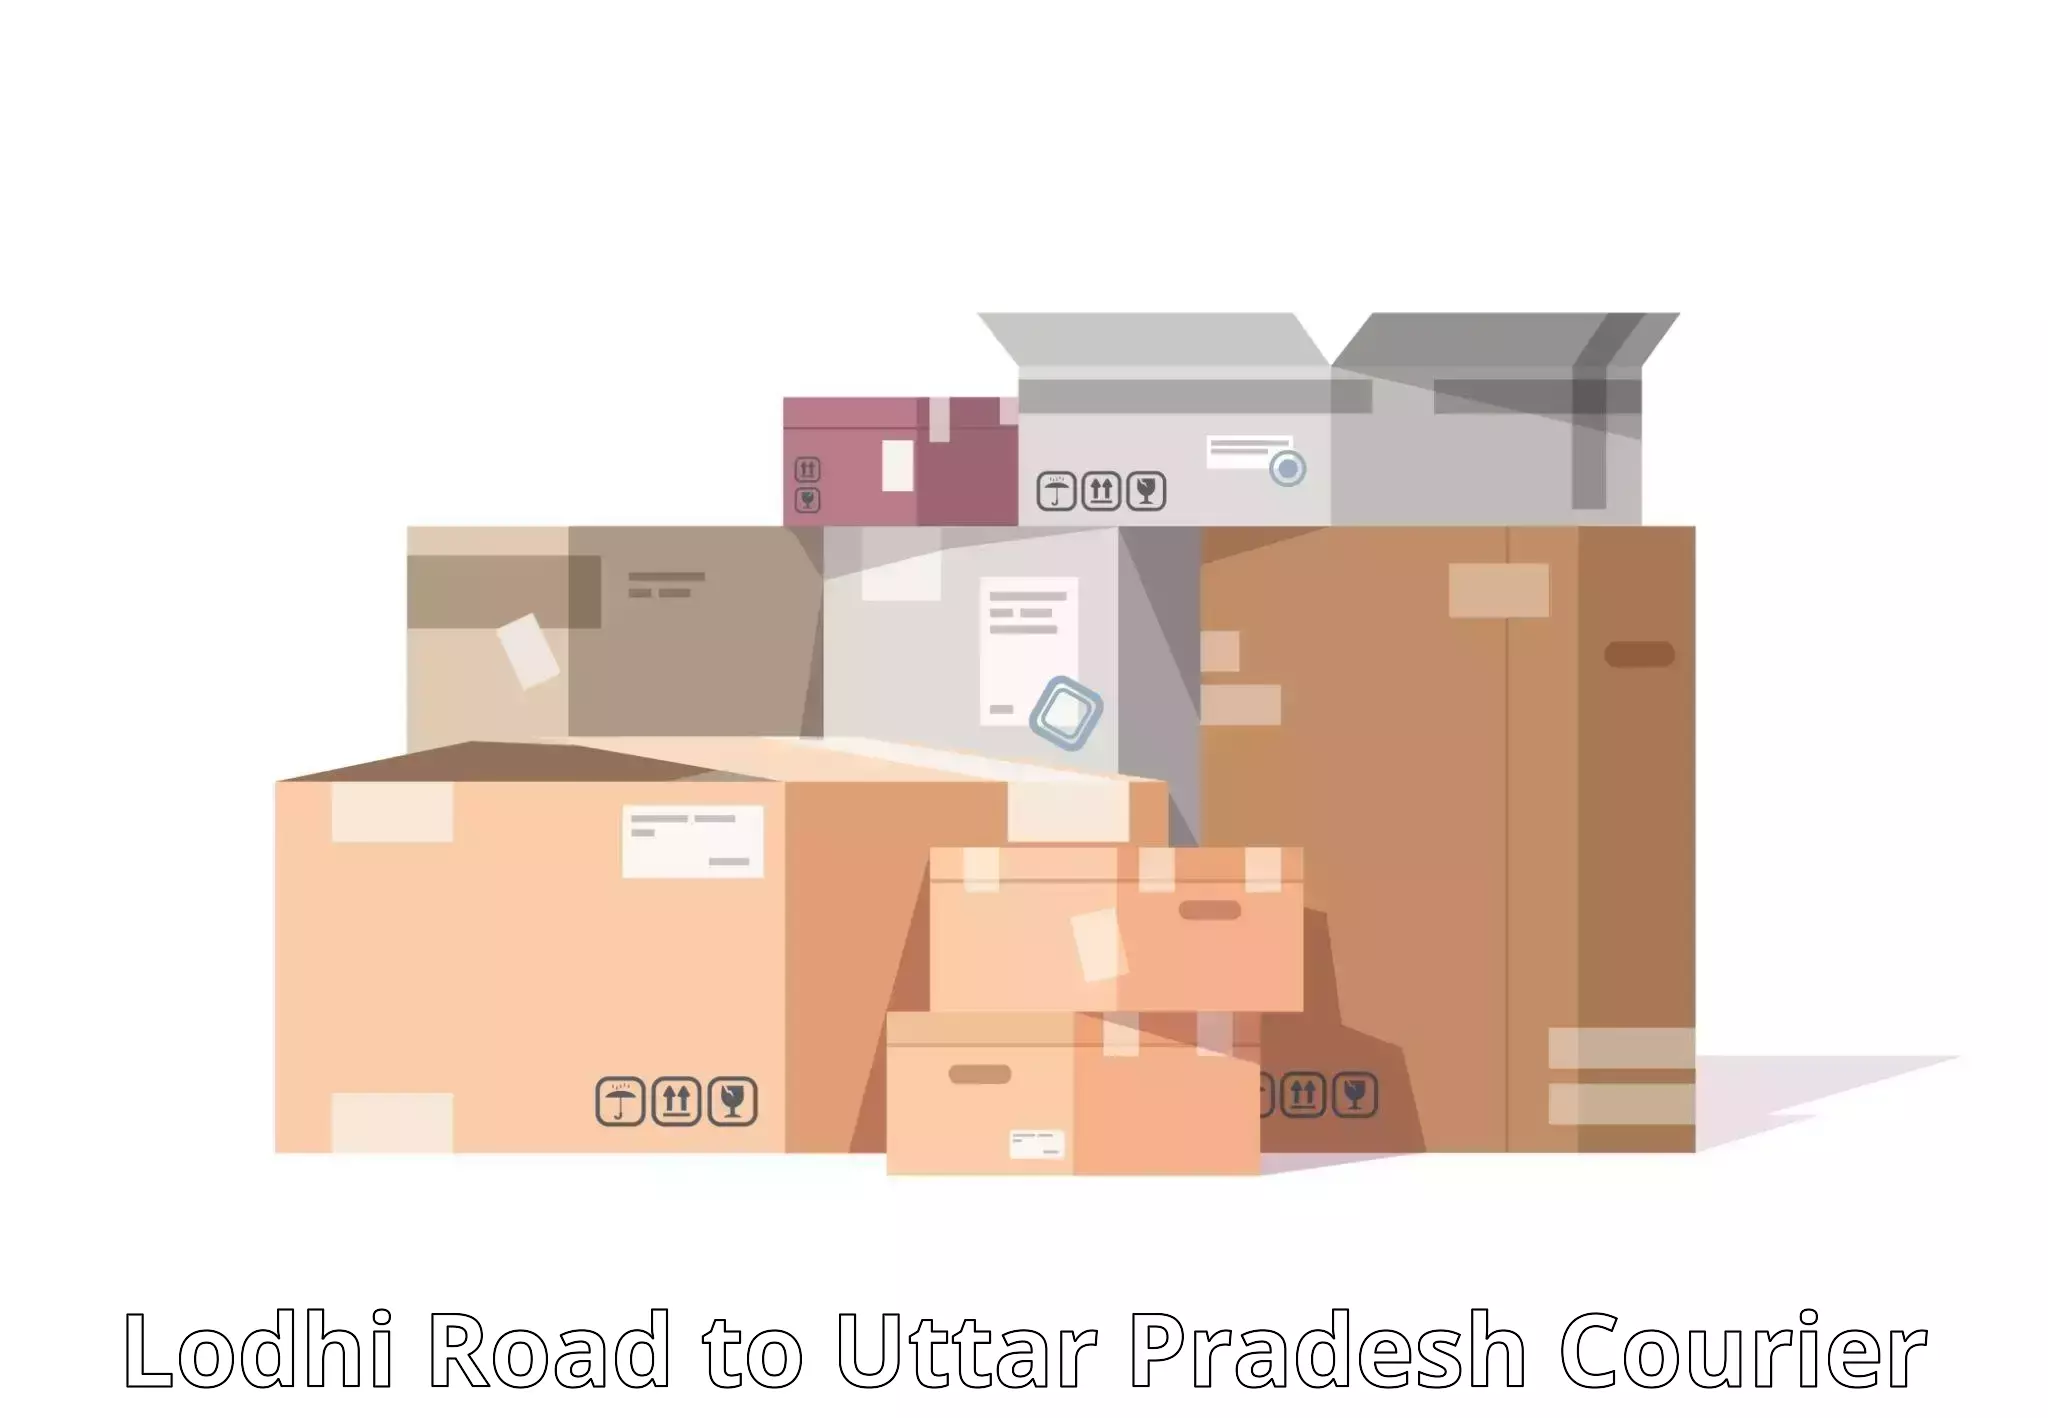 Round-the-clock parcel delivery Lodhi Road to Lalitpur